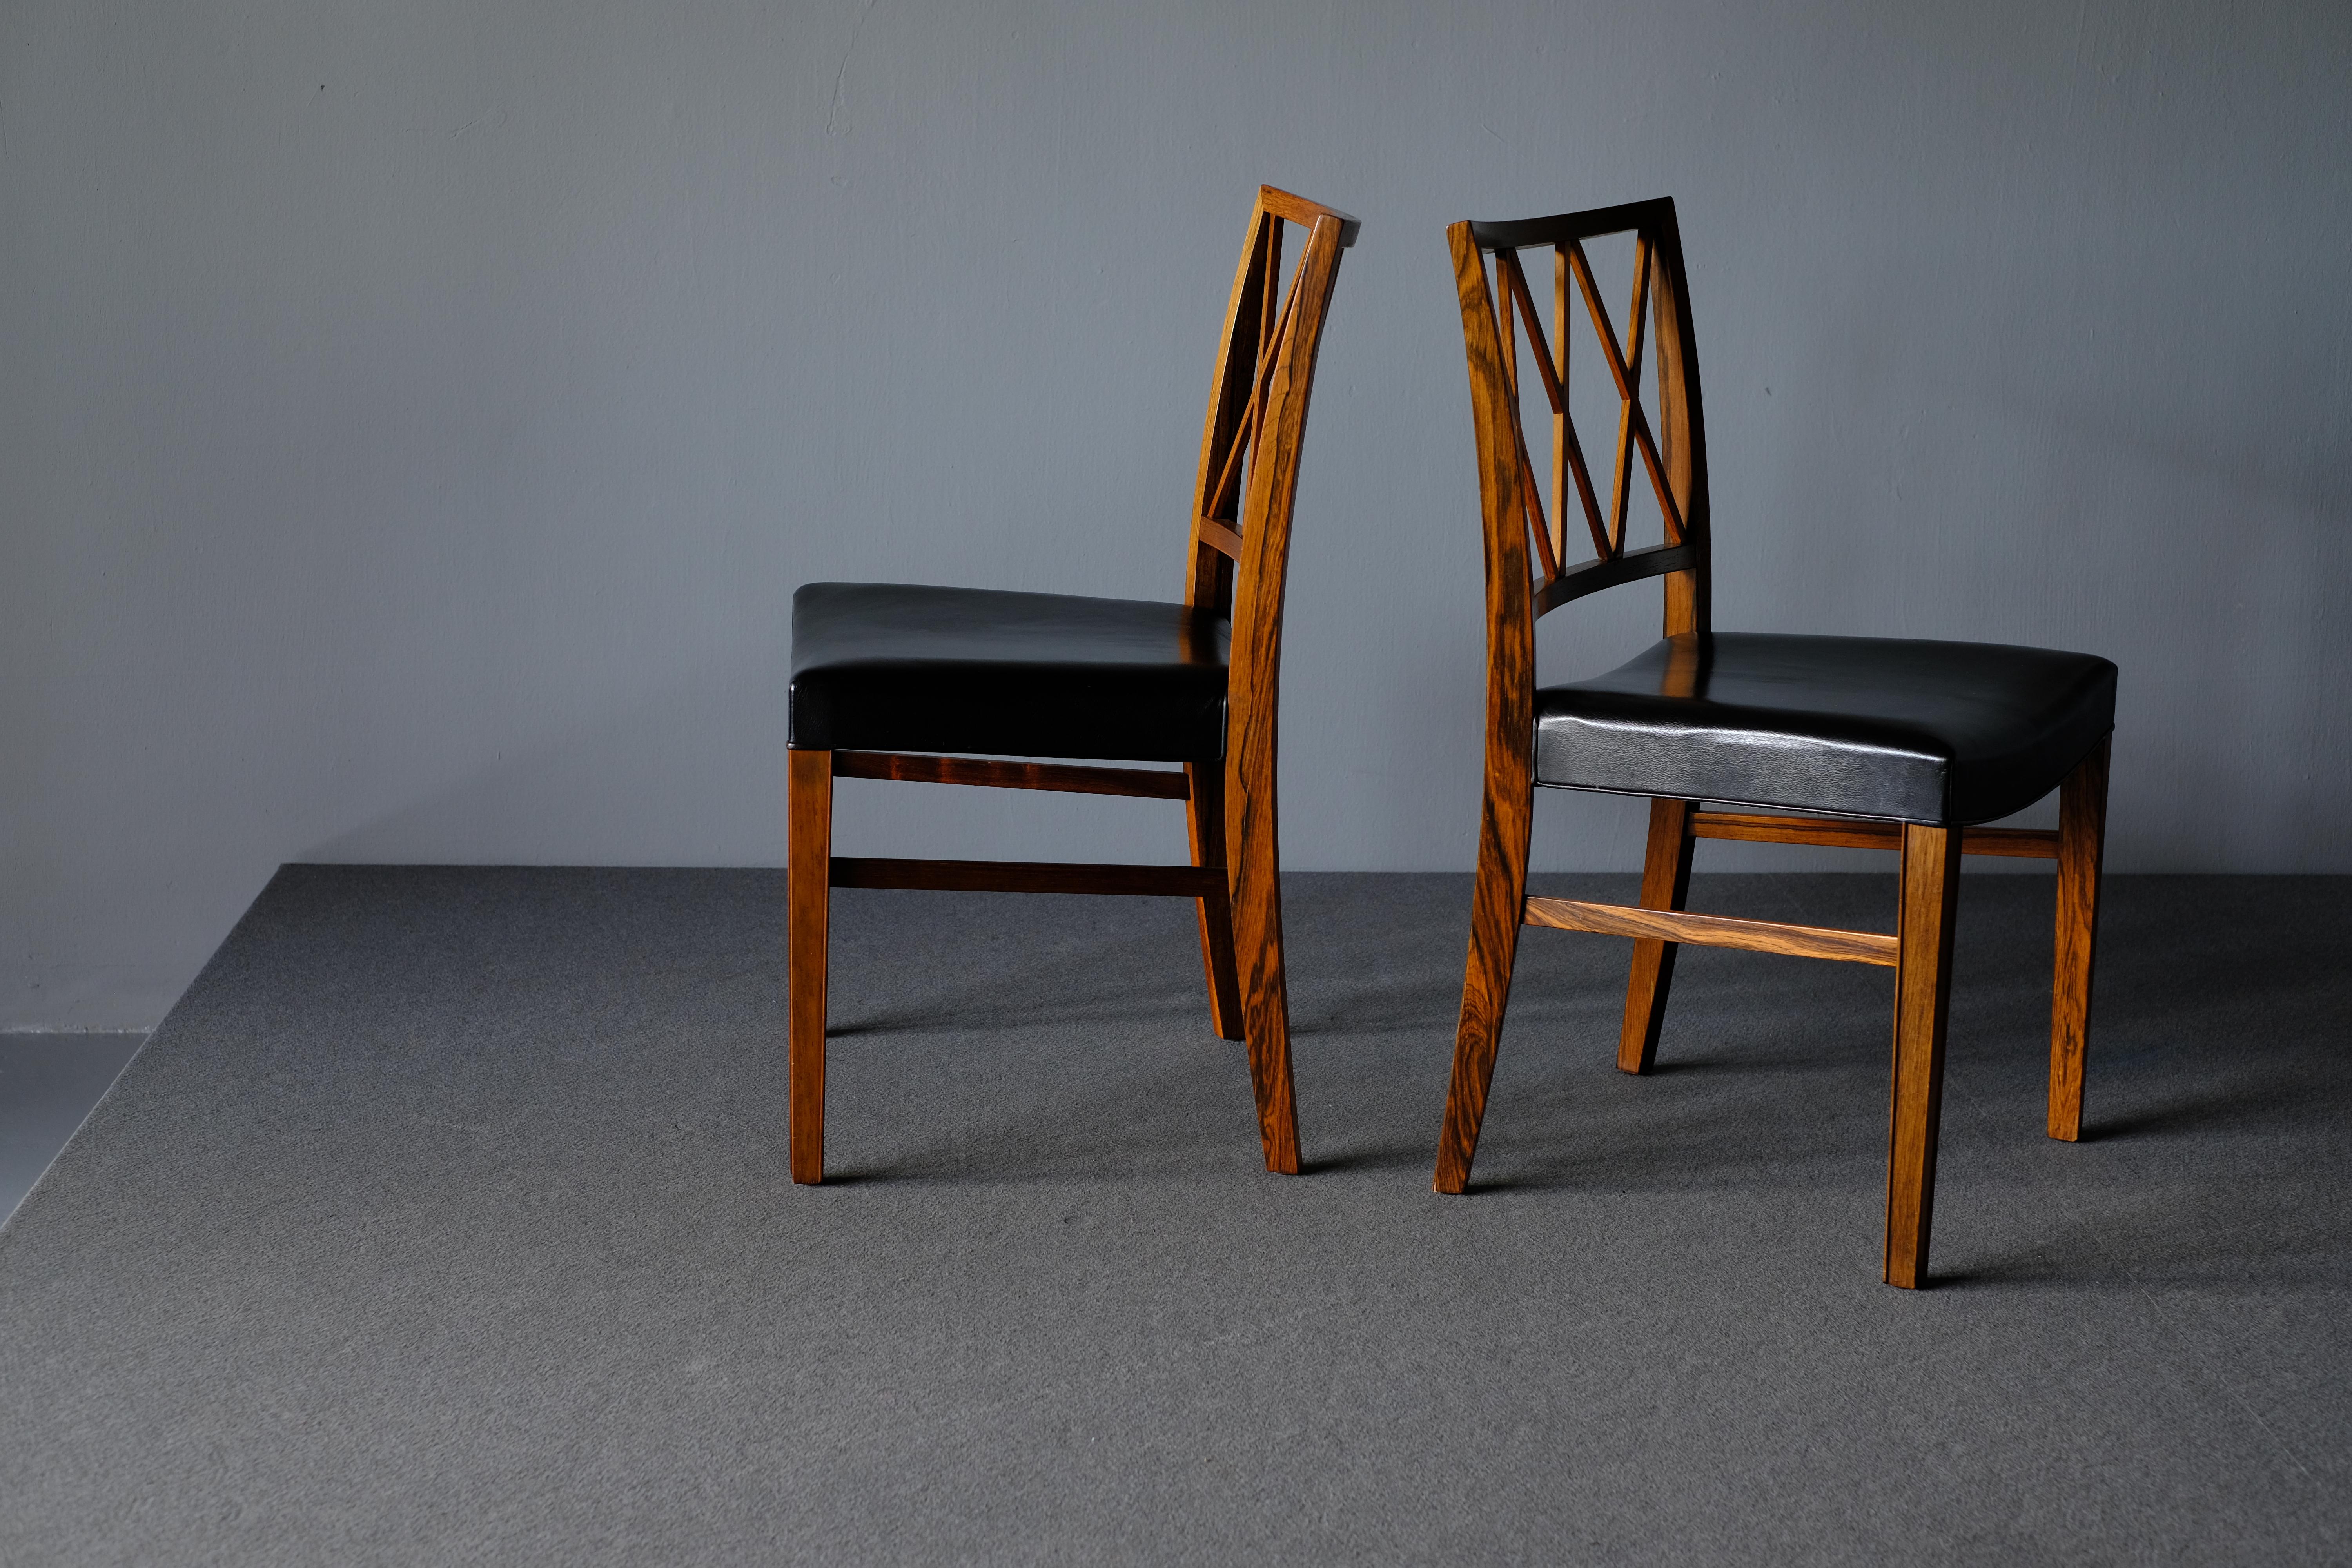 Beautiful pair of dining chairs in Brazilian rosewood designed by Ole Wanscher and produced by cabinetmaker A.J. Iversen. The pieces have refined slightly splayed legs with wonderful joinery details and are wonderfully crafted. The leather is fully